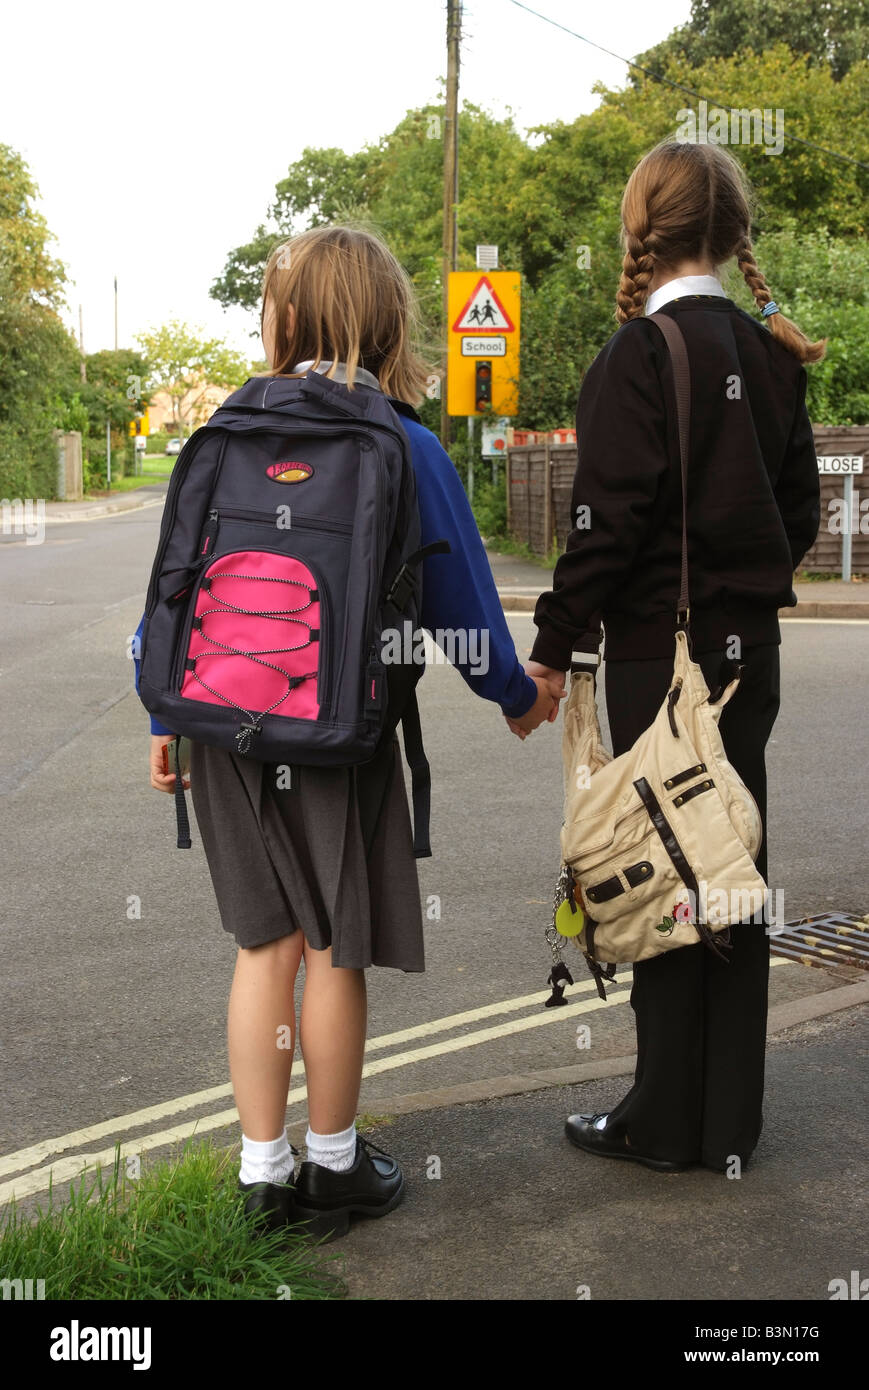 Schoolgirls in uniform wait to cross a road on the school route England UK Road safety wait at the kerb before crossing a road Stock Photo